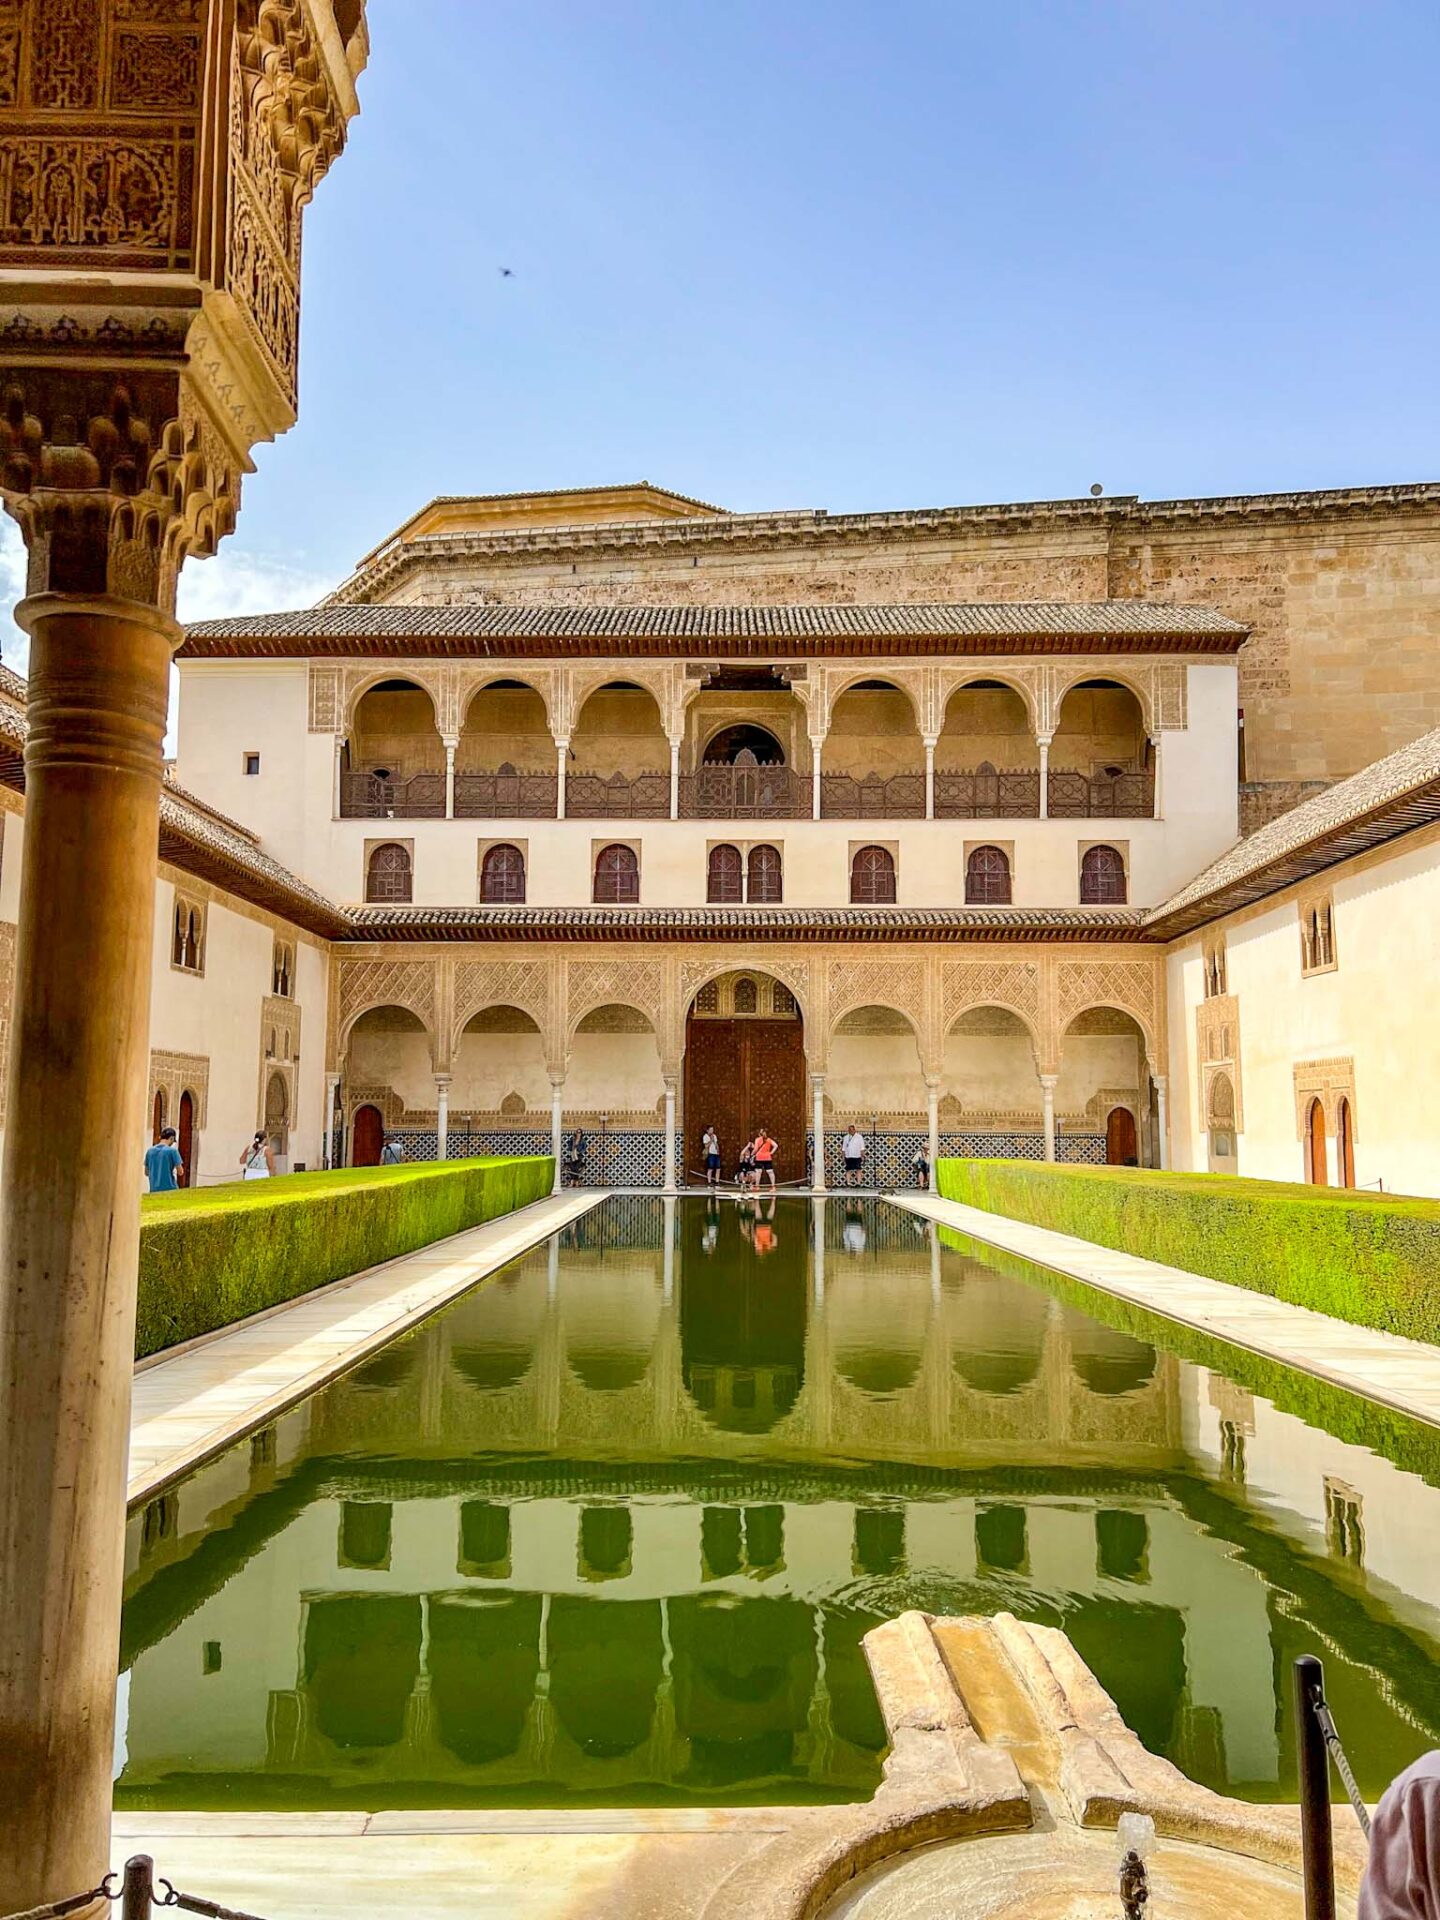 Granada itinerary, One day in Granda, water and palace building in Alhambra